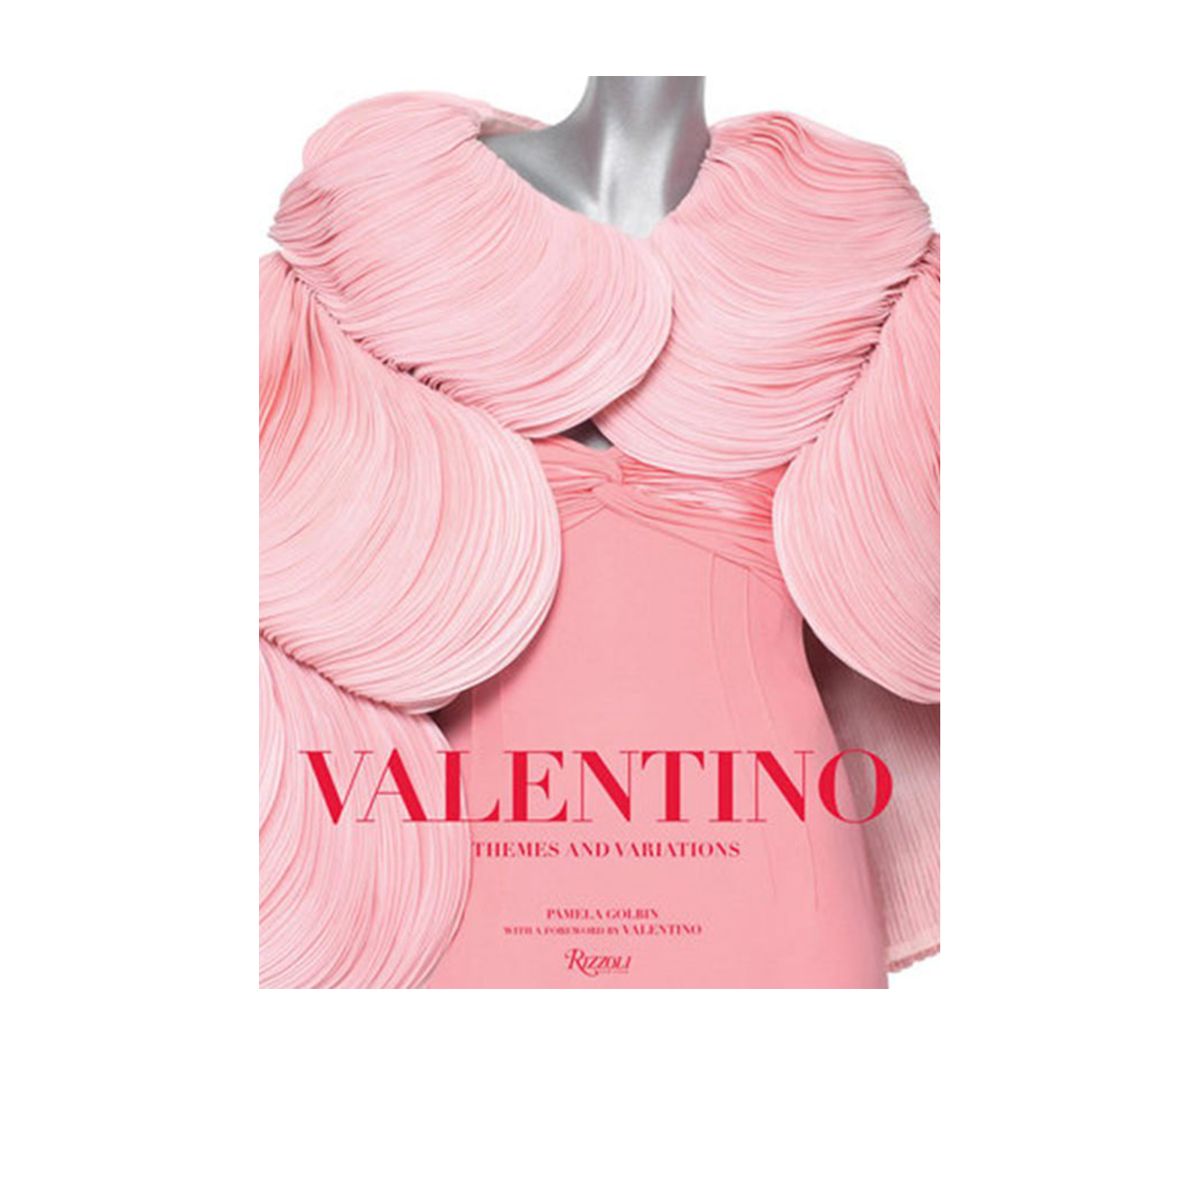 Valentino Themes And Variations Coffee Table Book